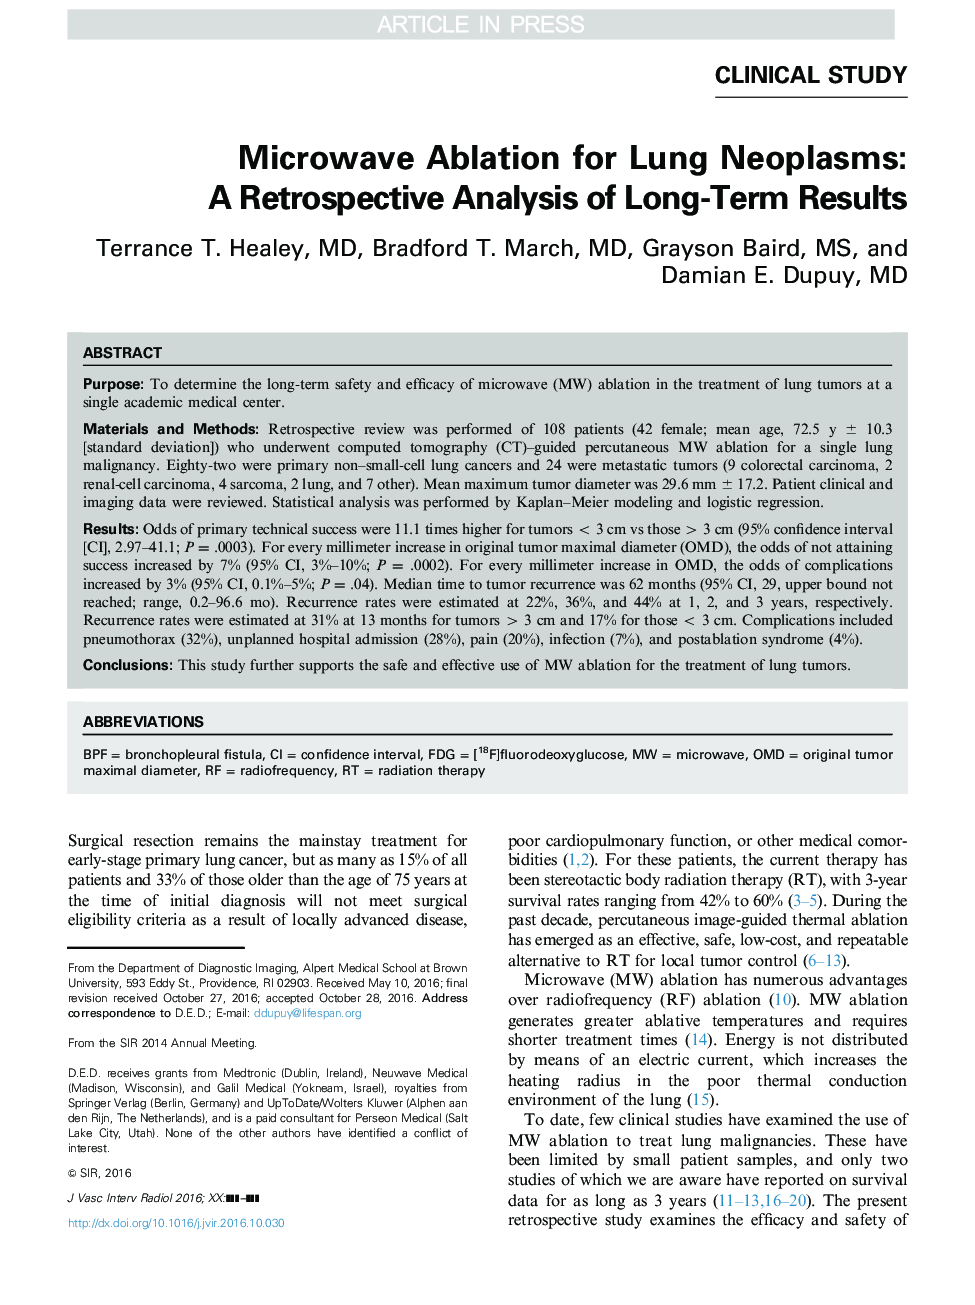 Microwave Ablation for Lung Neoplasms: A Retrospective Analysis of Long-Term Results